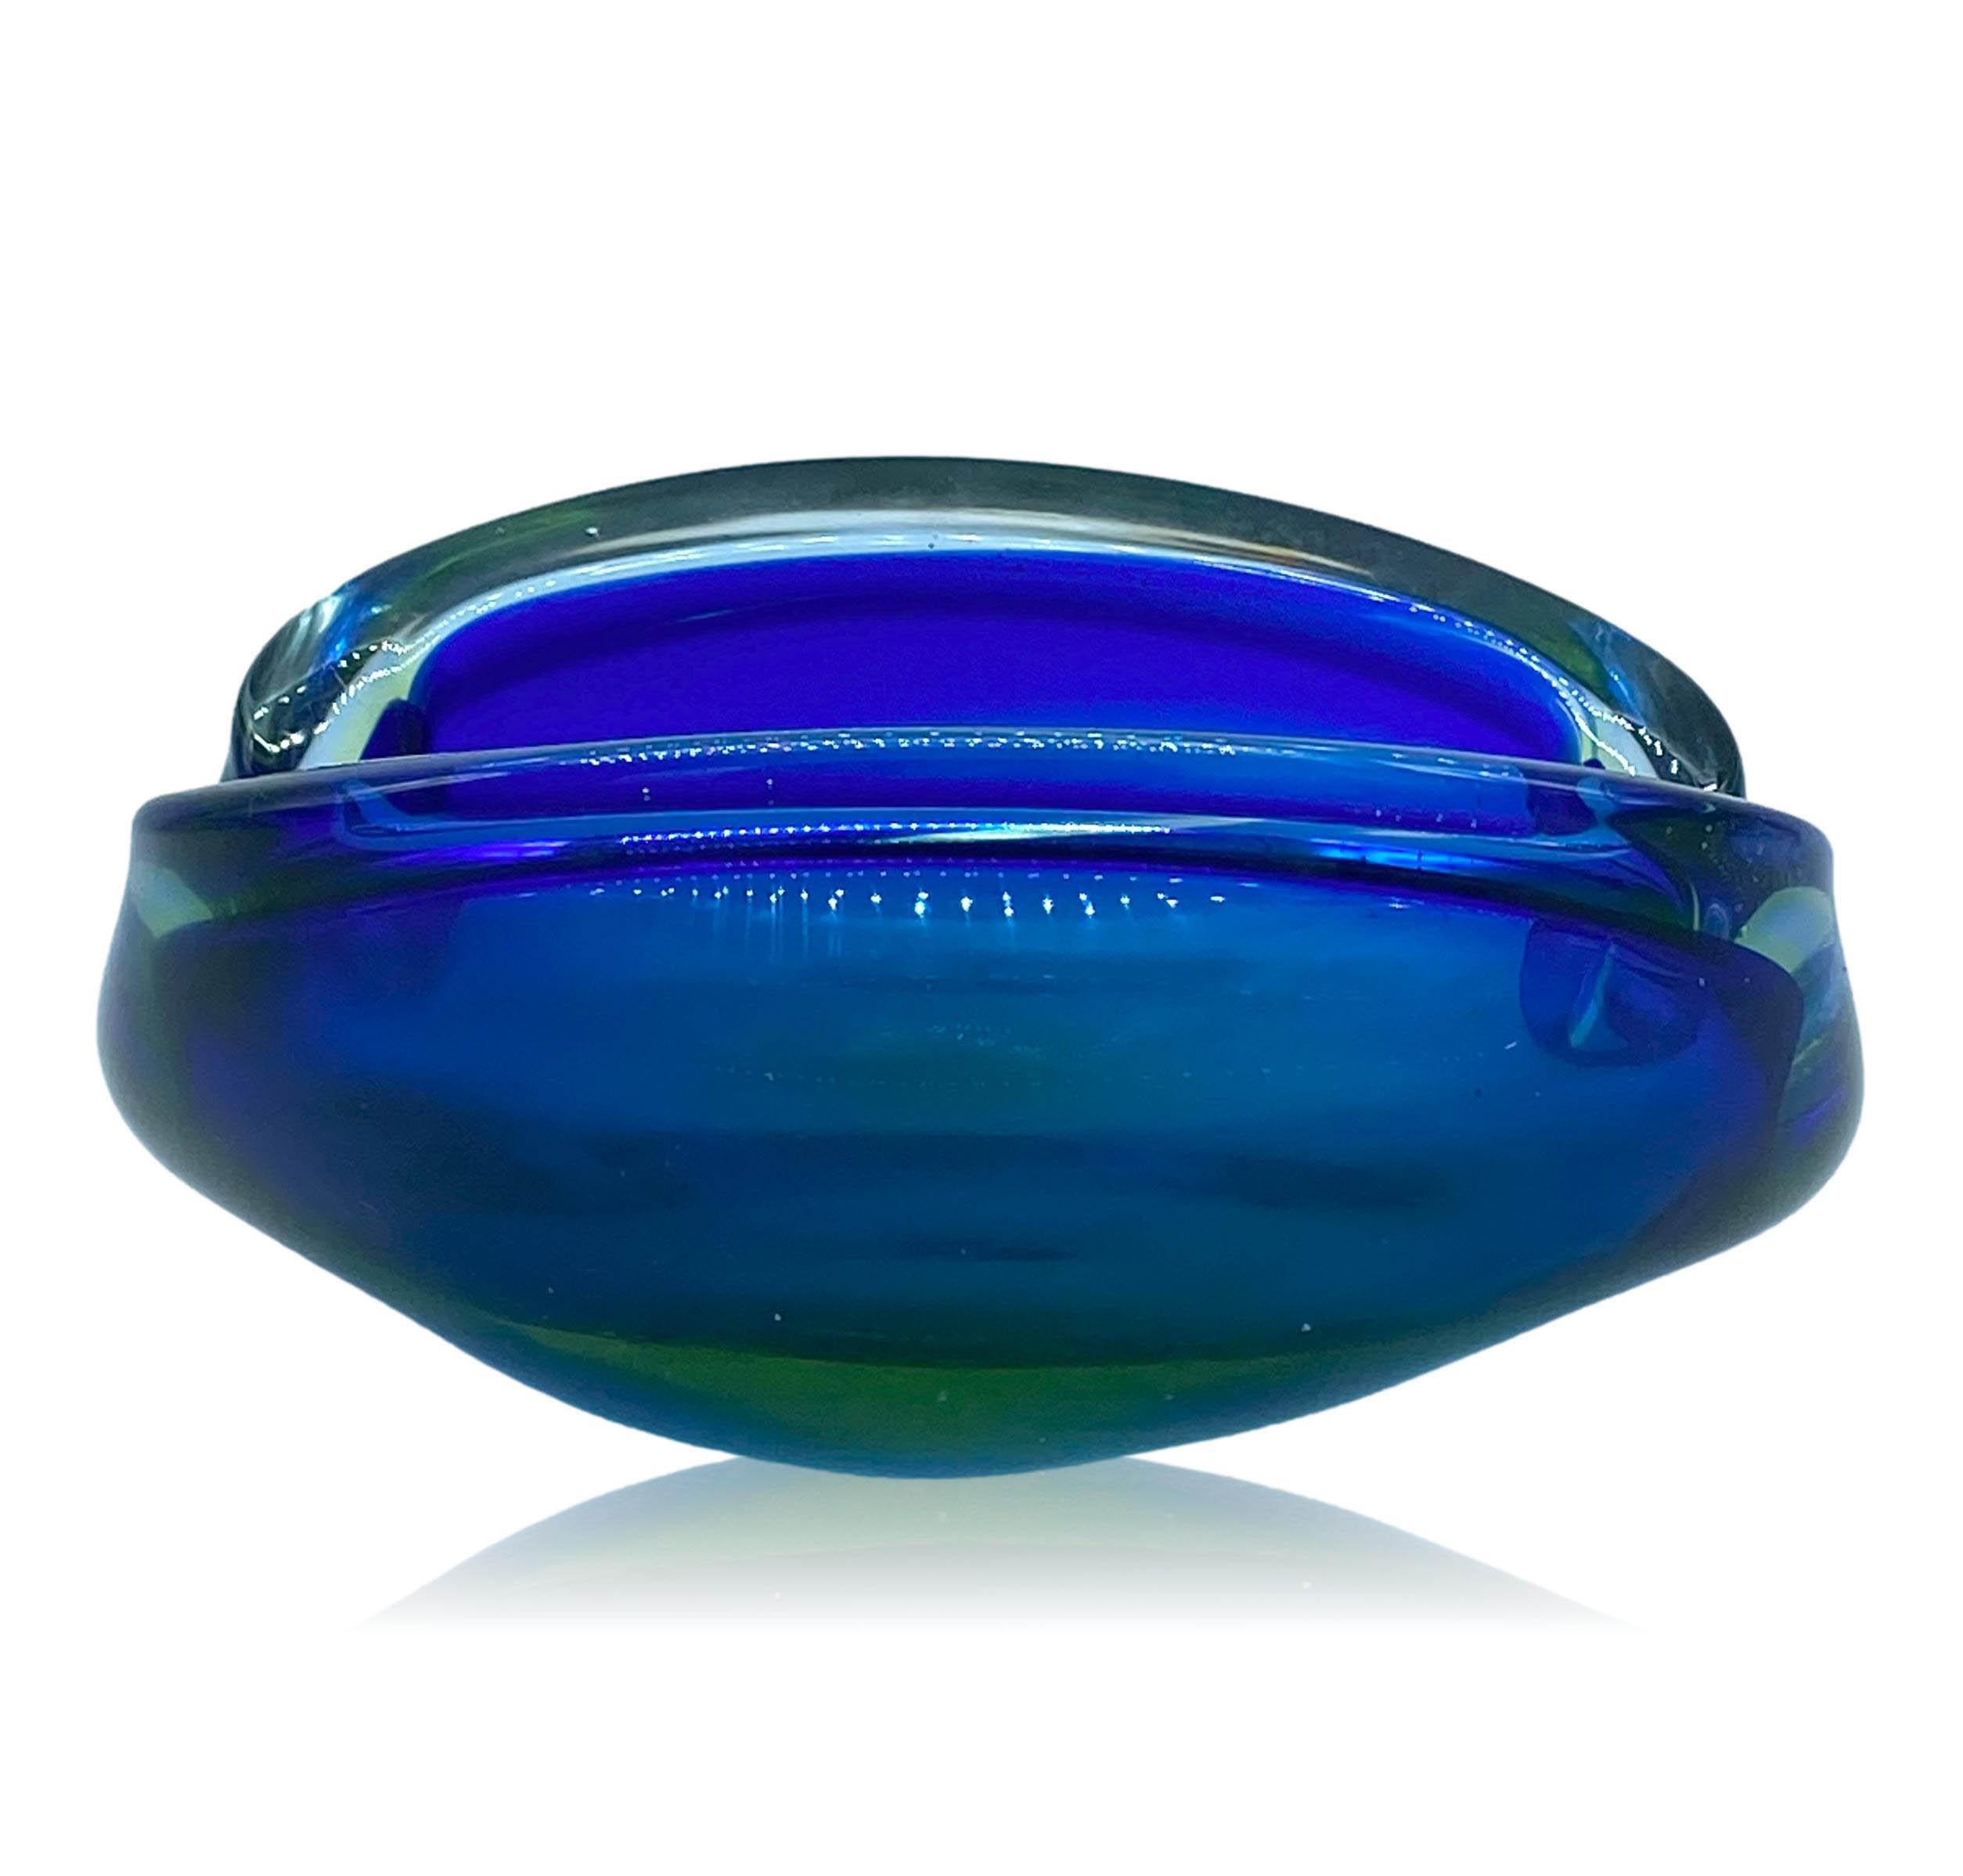 Ashtray / Empty pockets in Murano glass Seguso, 1960. Elliptical shape in blue, turquoise and transparent. Very good condition.